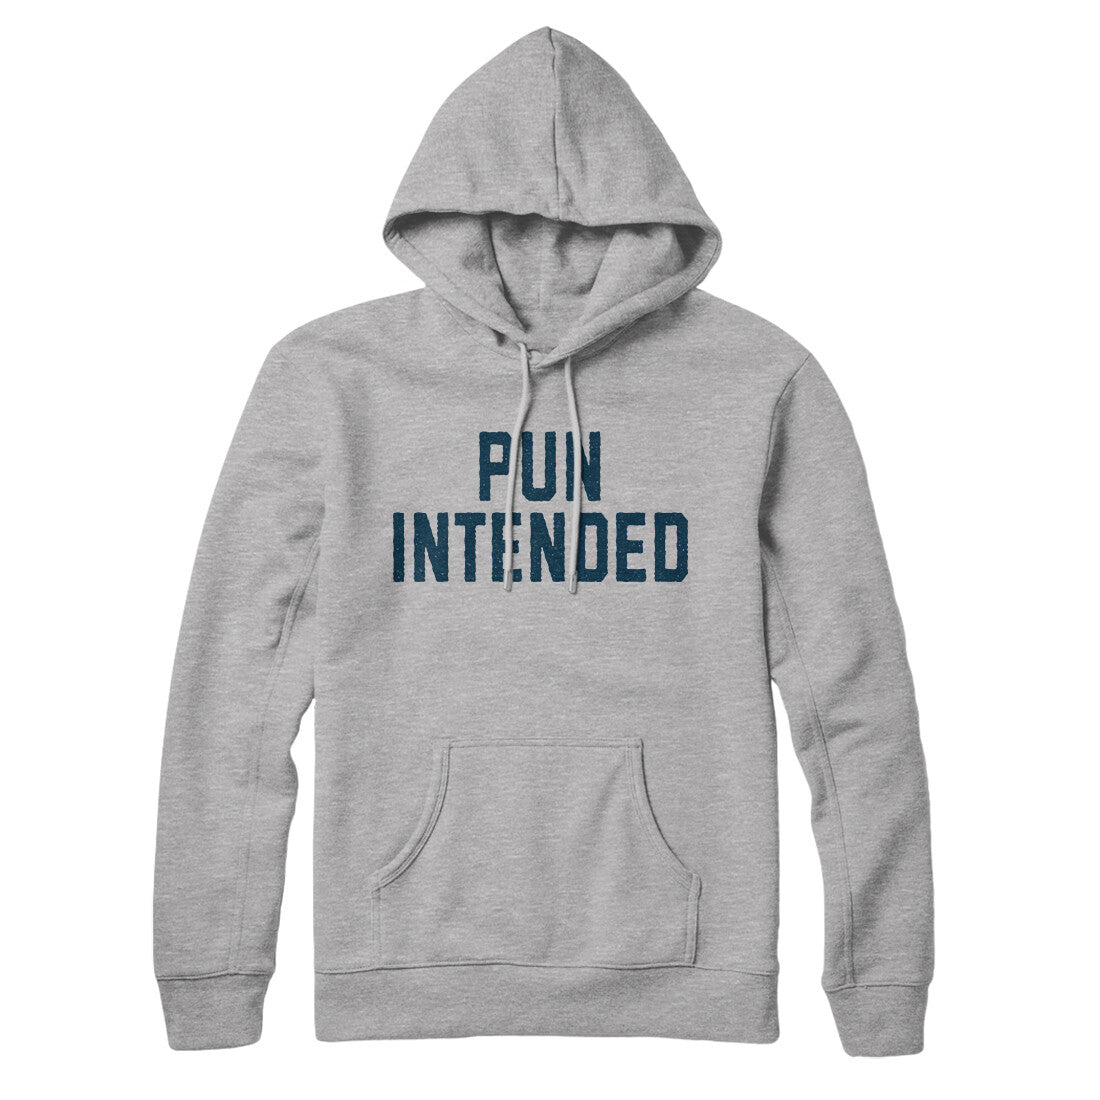 Pun Intended in Heather Grey Color